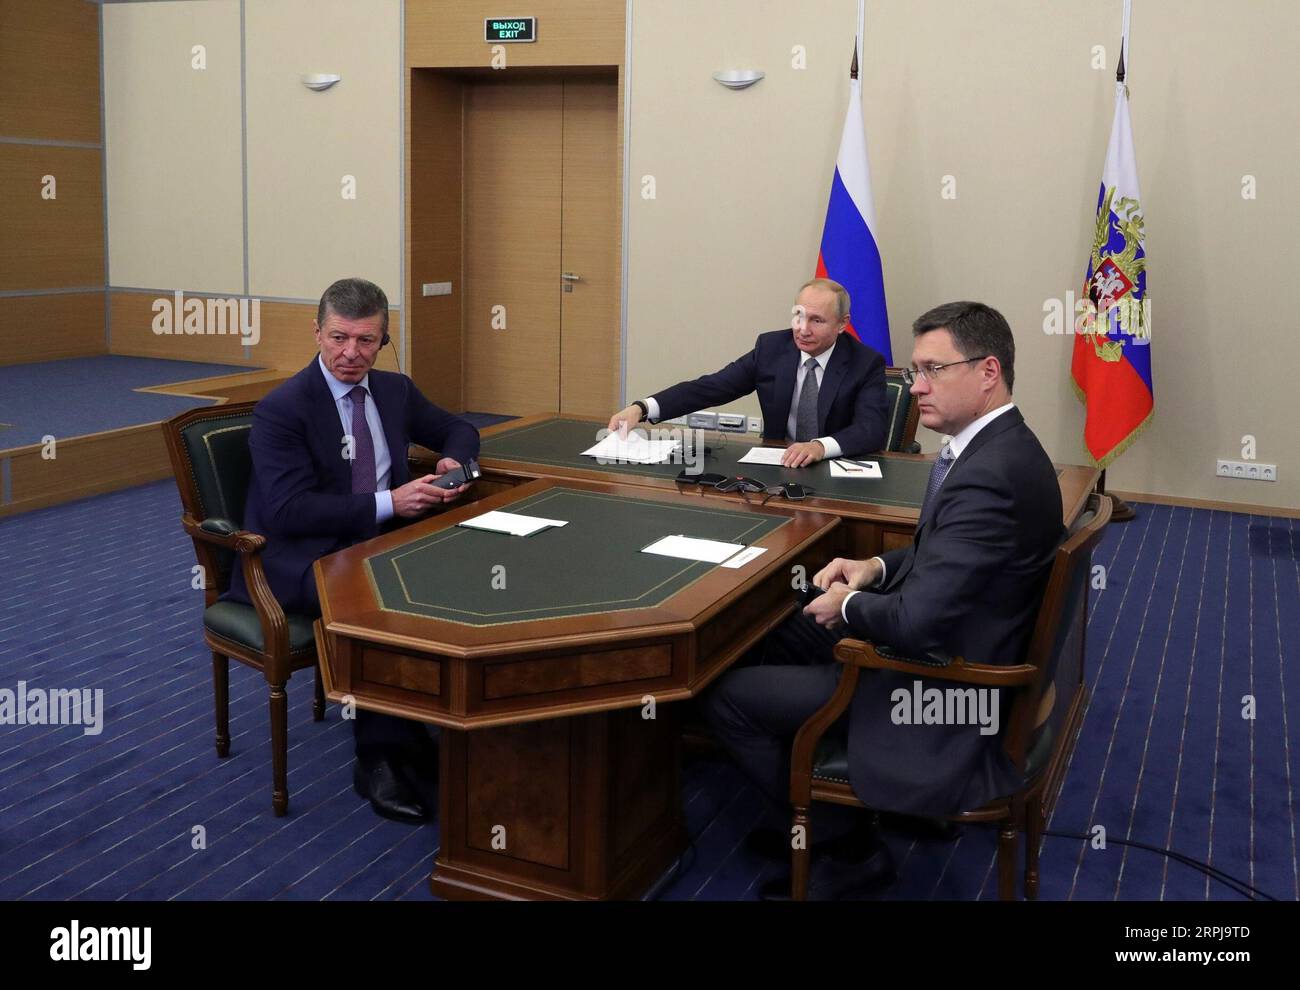 191202 -- MOSCOW, Dec. 2, 2019 Xinhua -- Russian President Vladimir Putin C, Russian Energy Minister Alexander Novak R and Deputy Prime Minister Dmitry Kozak watch the launching ceremony of the China-Russia east-route natural gas pipeline via teleconference in Sochi, Russia, Dec. 2, 2019. Chinese President Xi Jinping had a video call with his Russian counterpart Vladimir Putin Monday afternoon, as the two heads of state jointly witnessed the launching ceremony of the China-Russia east-route natural gas pipeline. Sputnik/Handout via Xinhua RUSSIA-CHINA-PUTIN-NATURAL GAS PIPELINE-LAUNCH PUBLICAT Stock Photo